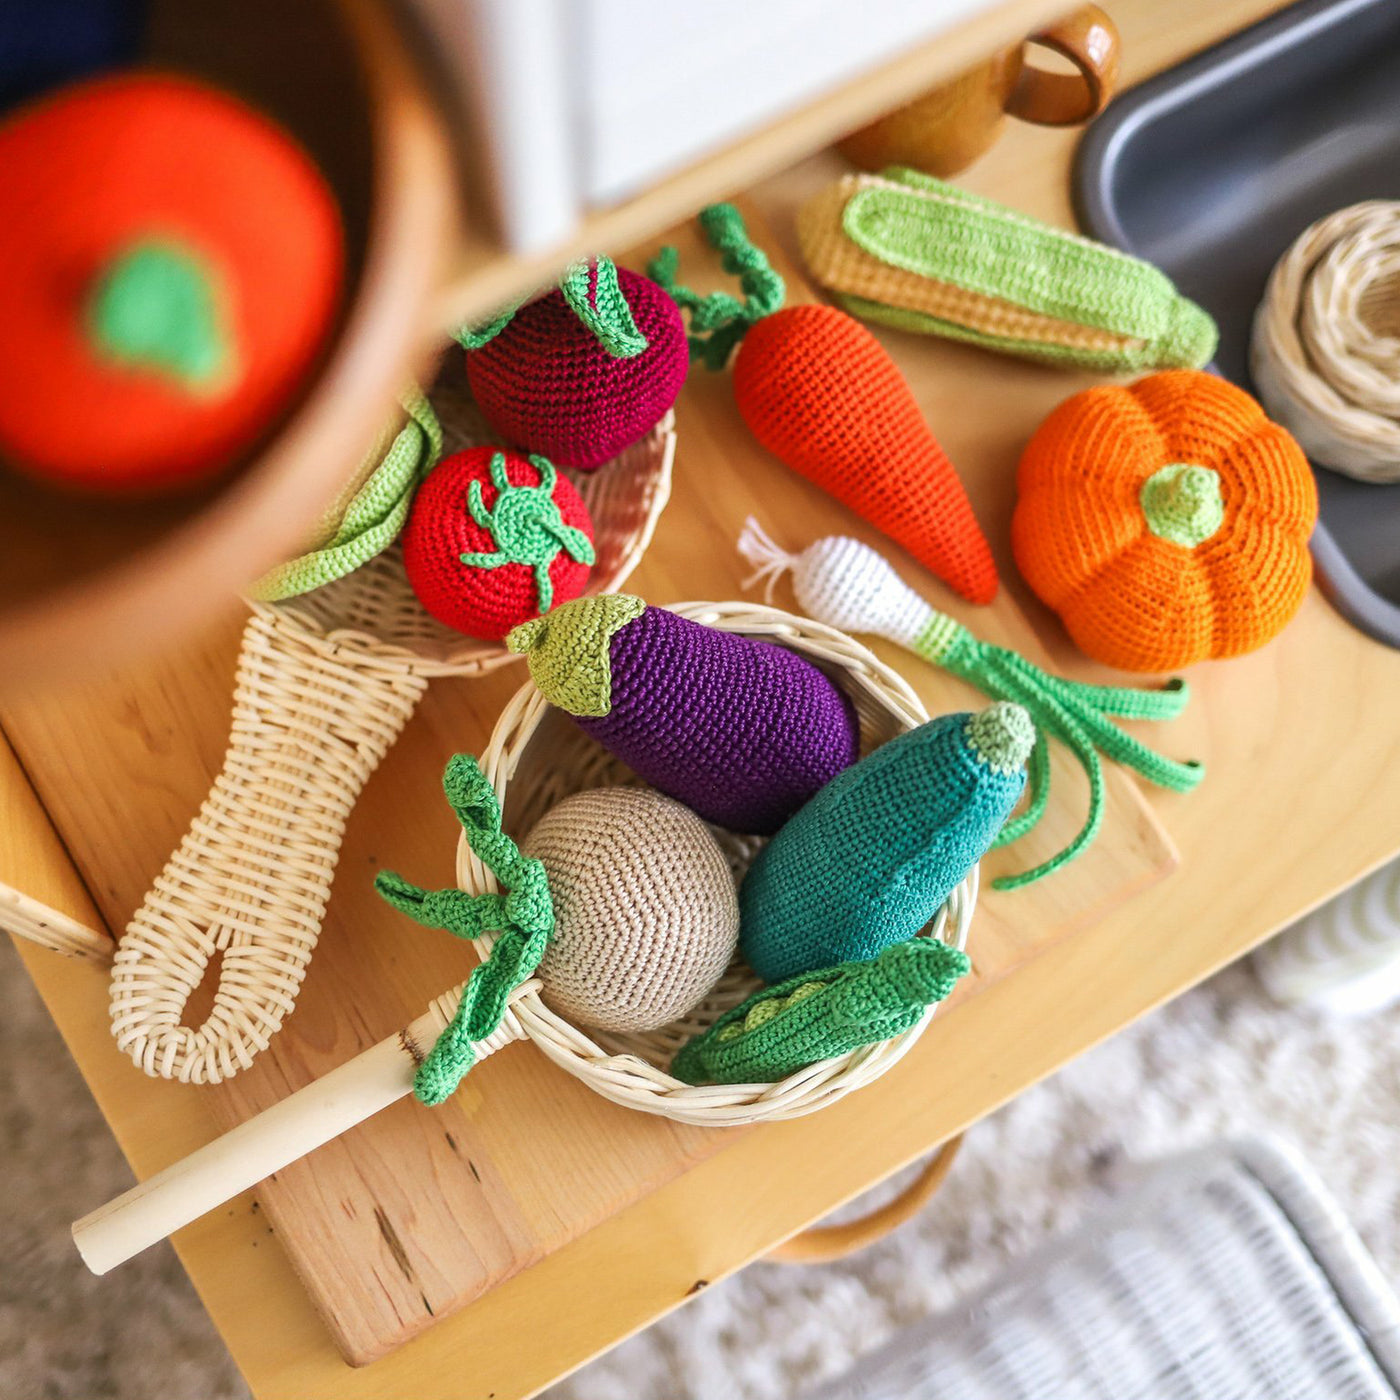 The Complete Vegetable Toy Set - 12 pieces